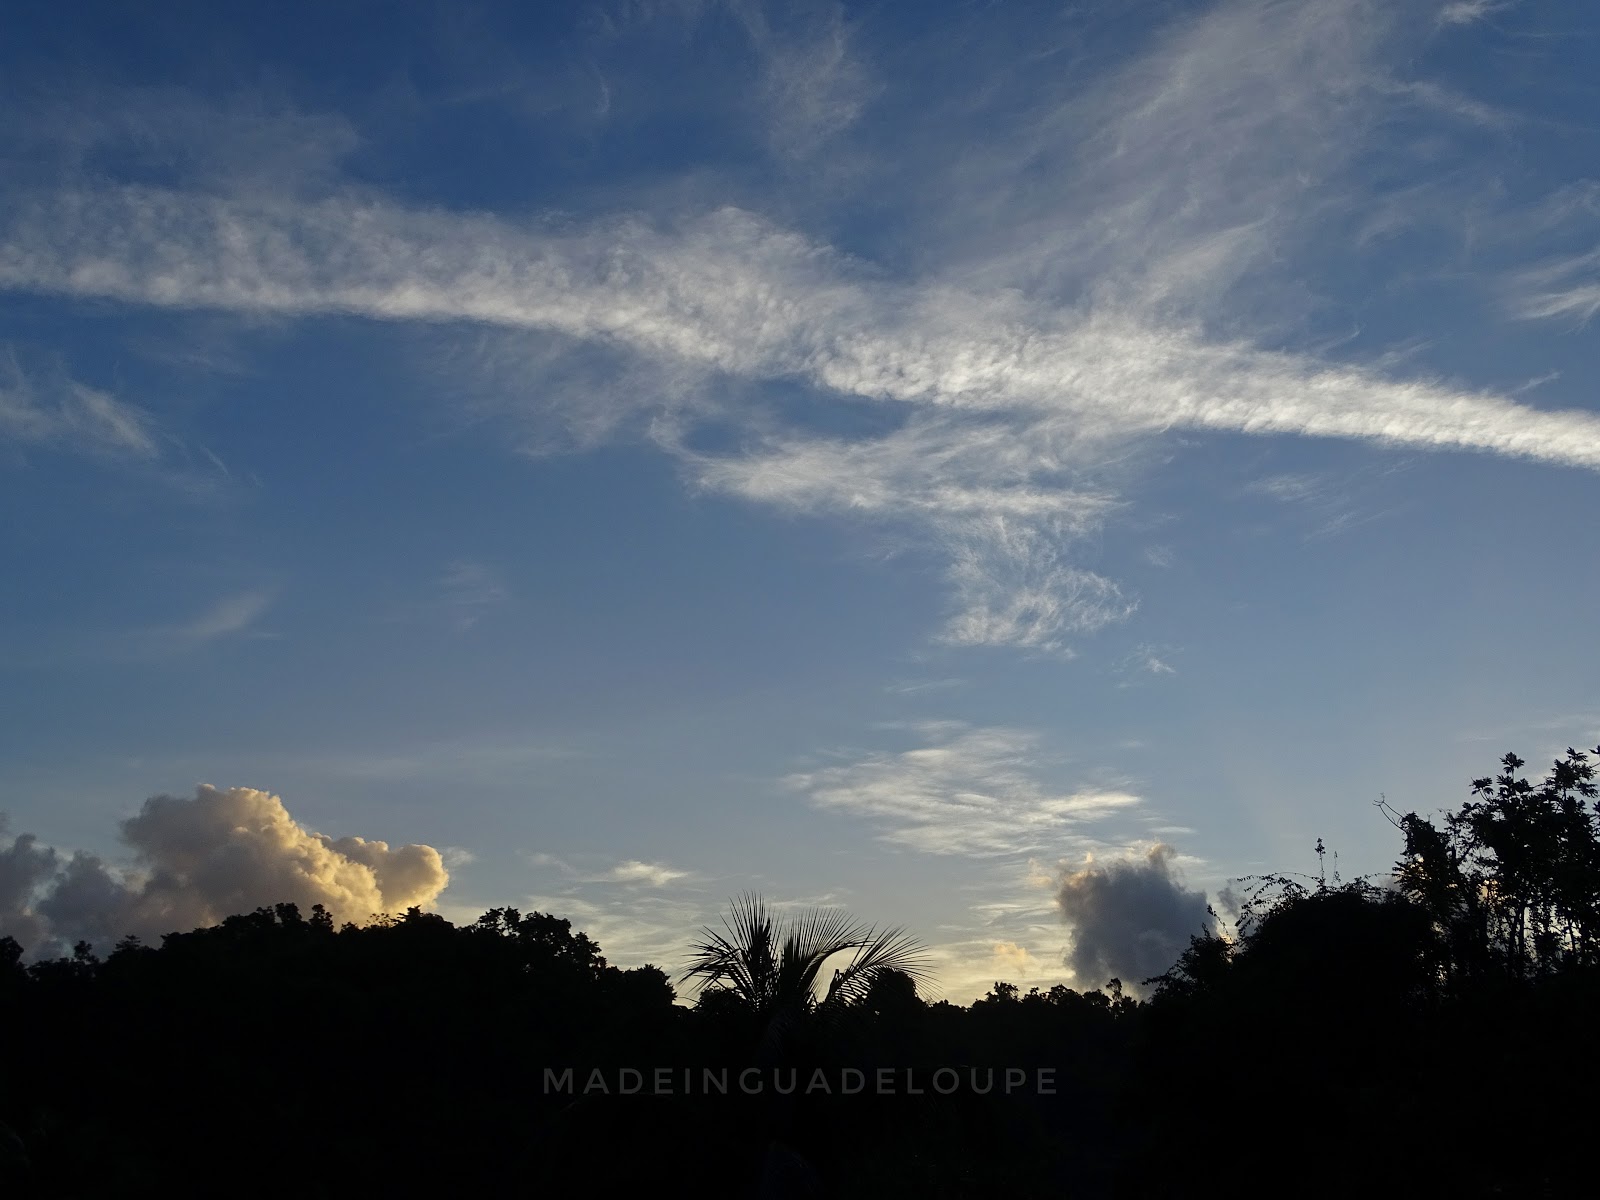 guadeloupe sky caribbean blog lifestyle france madeinguadeloupe antilles french west indies 